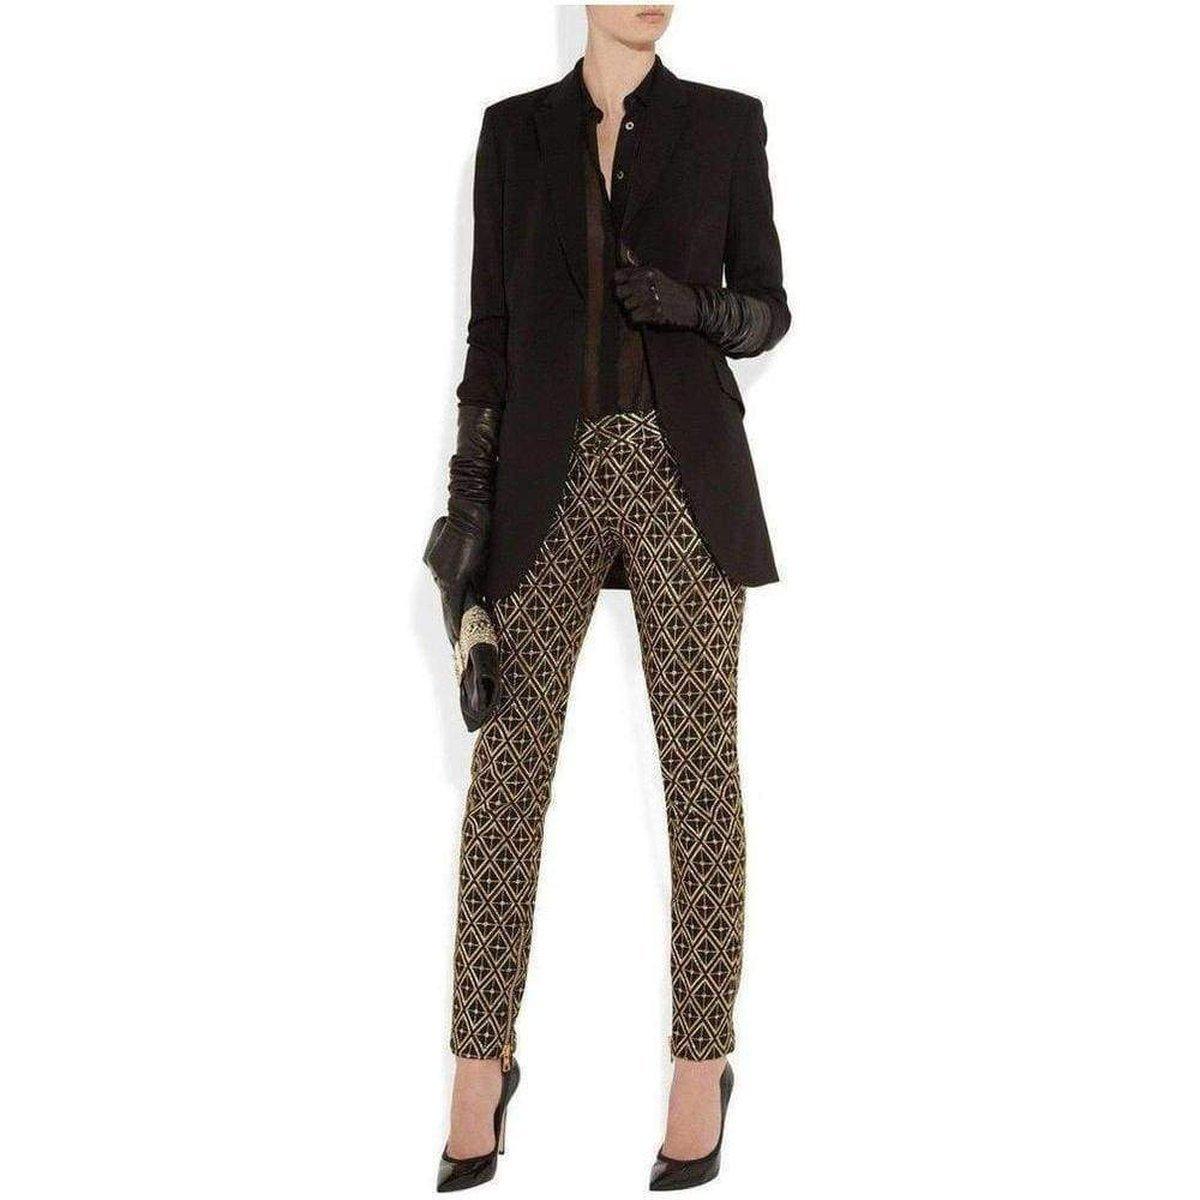 Black Metallic Jacquard Pants Black and gold jacquard
Zipped side slit pockets
Snap-fastening back pockets
Zipped cuffs concealed hook
Zip fastenings at front 
45% acrylic, 37% wool, 7% polyester, 7% silk, 4% polyamide
Dry clean. 
Model: 5935